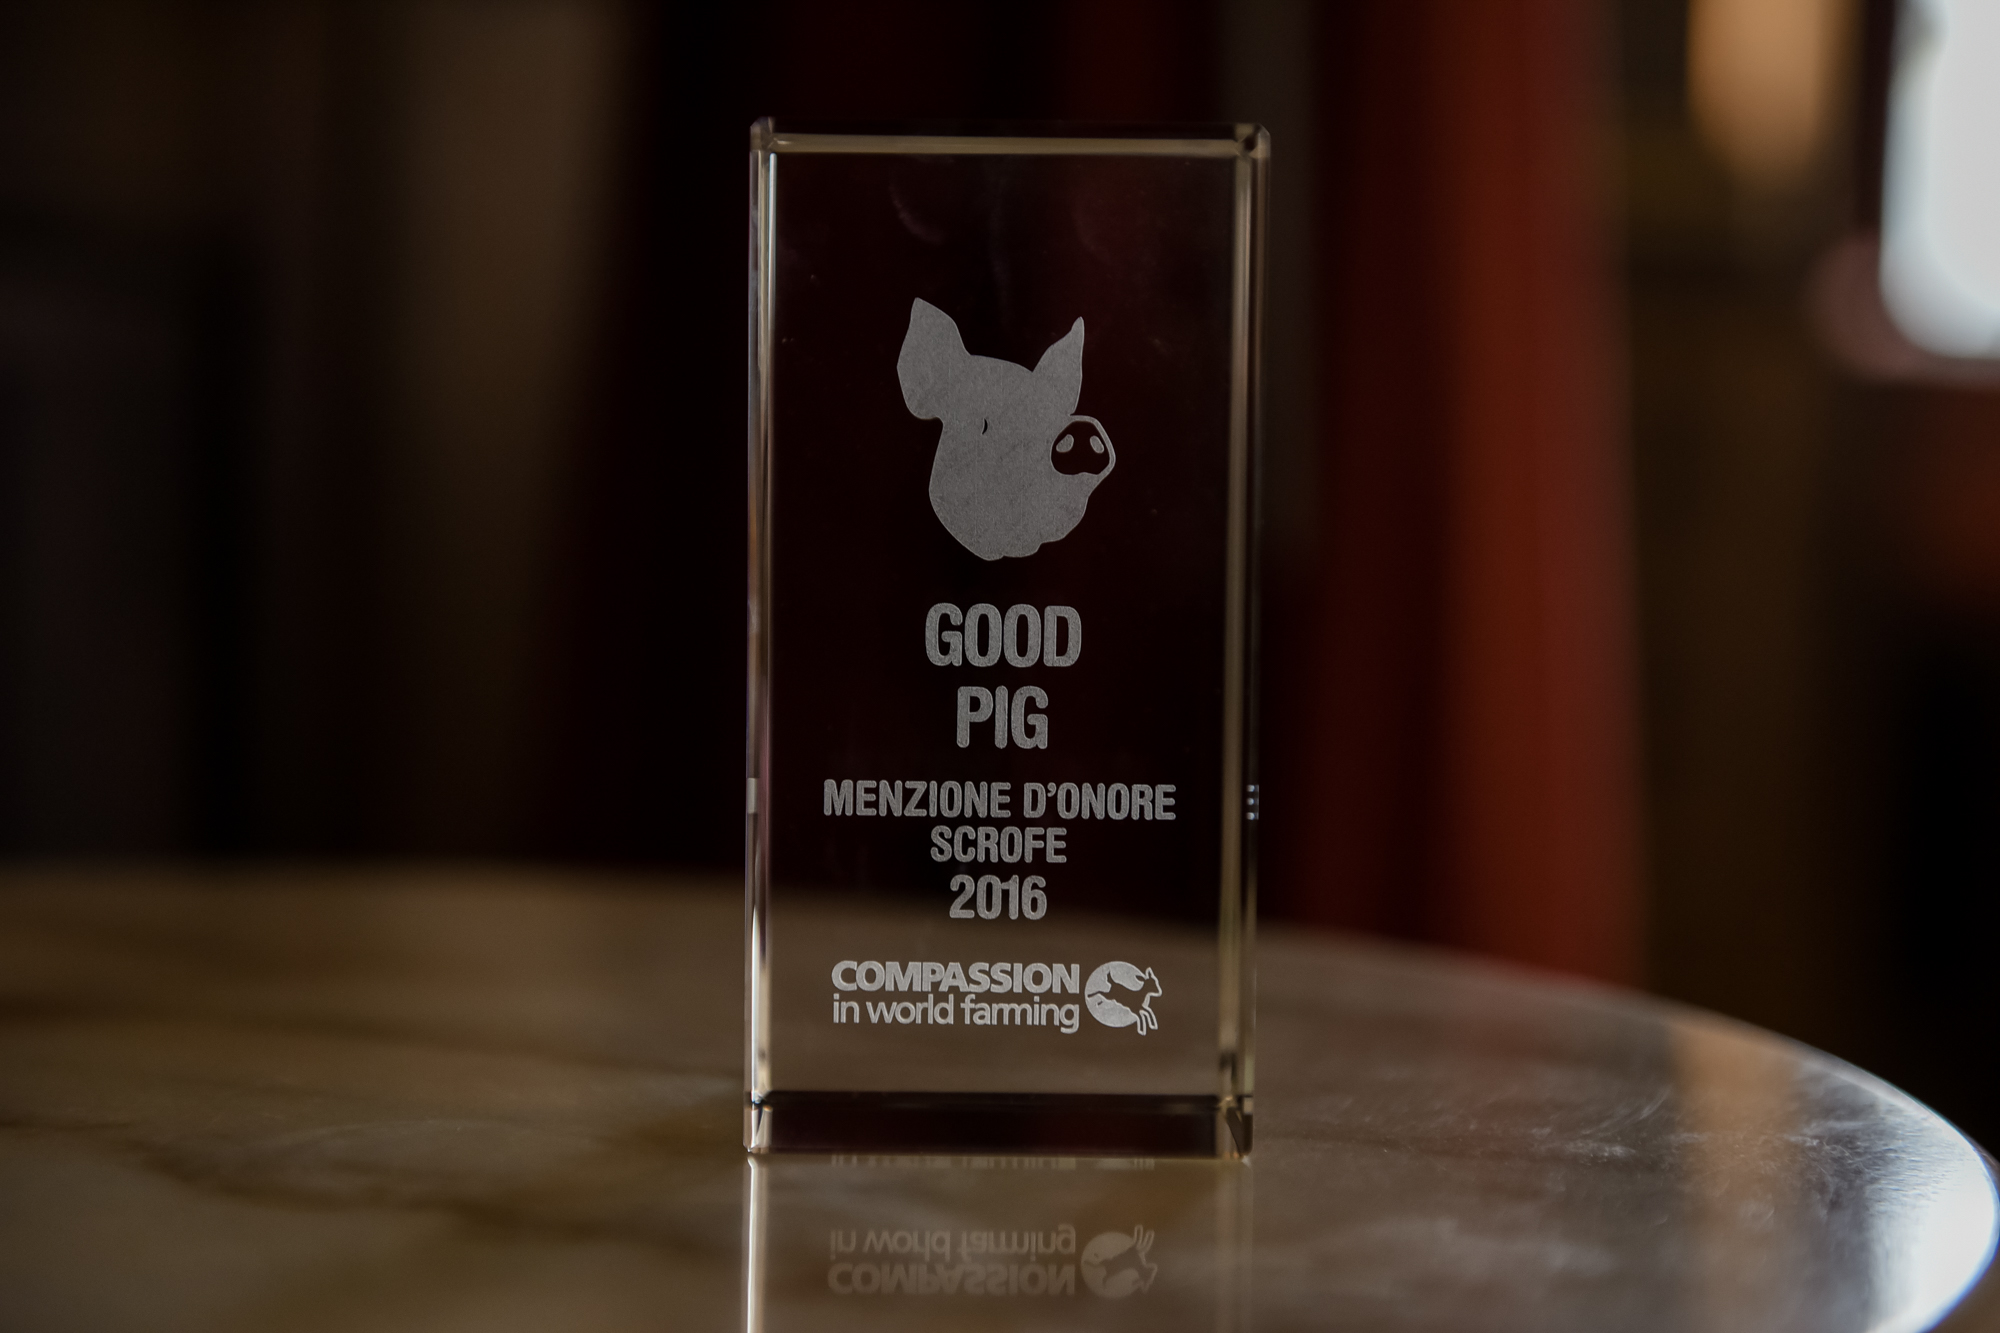 The Good Farm Animal Welfare Awards celebrate the commitment of leading food businesses to improve animal welfare standards